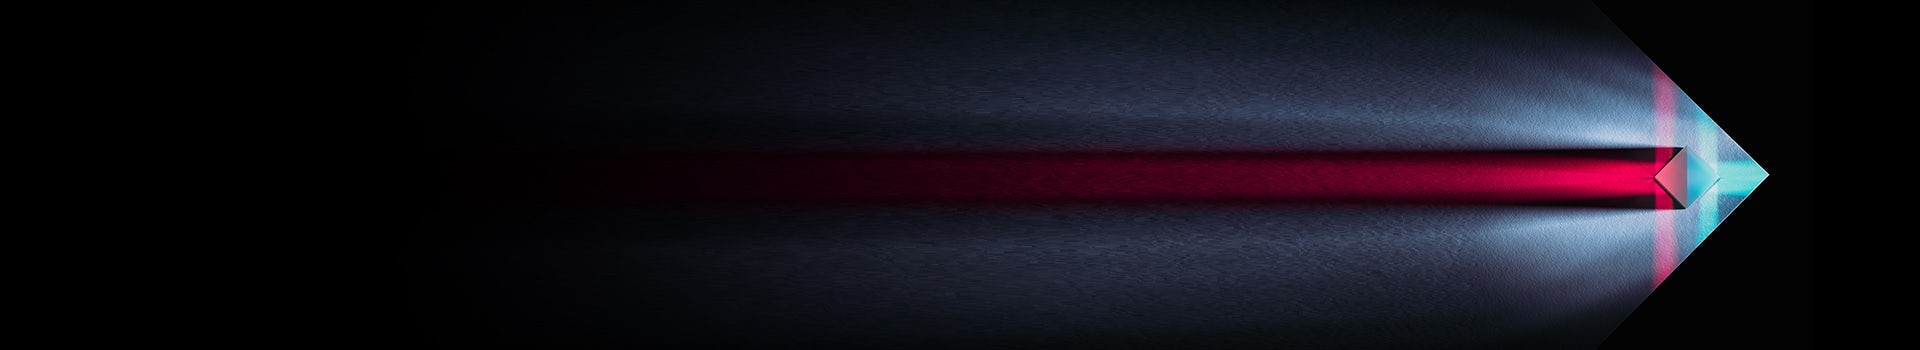 An image of a red and blue light in a dark room.